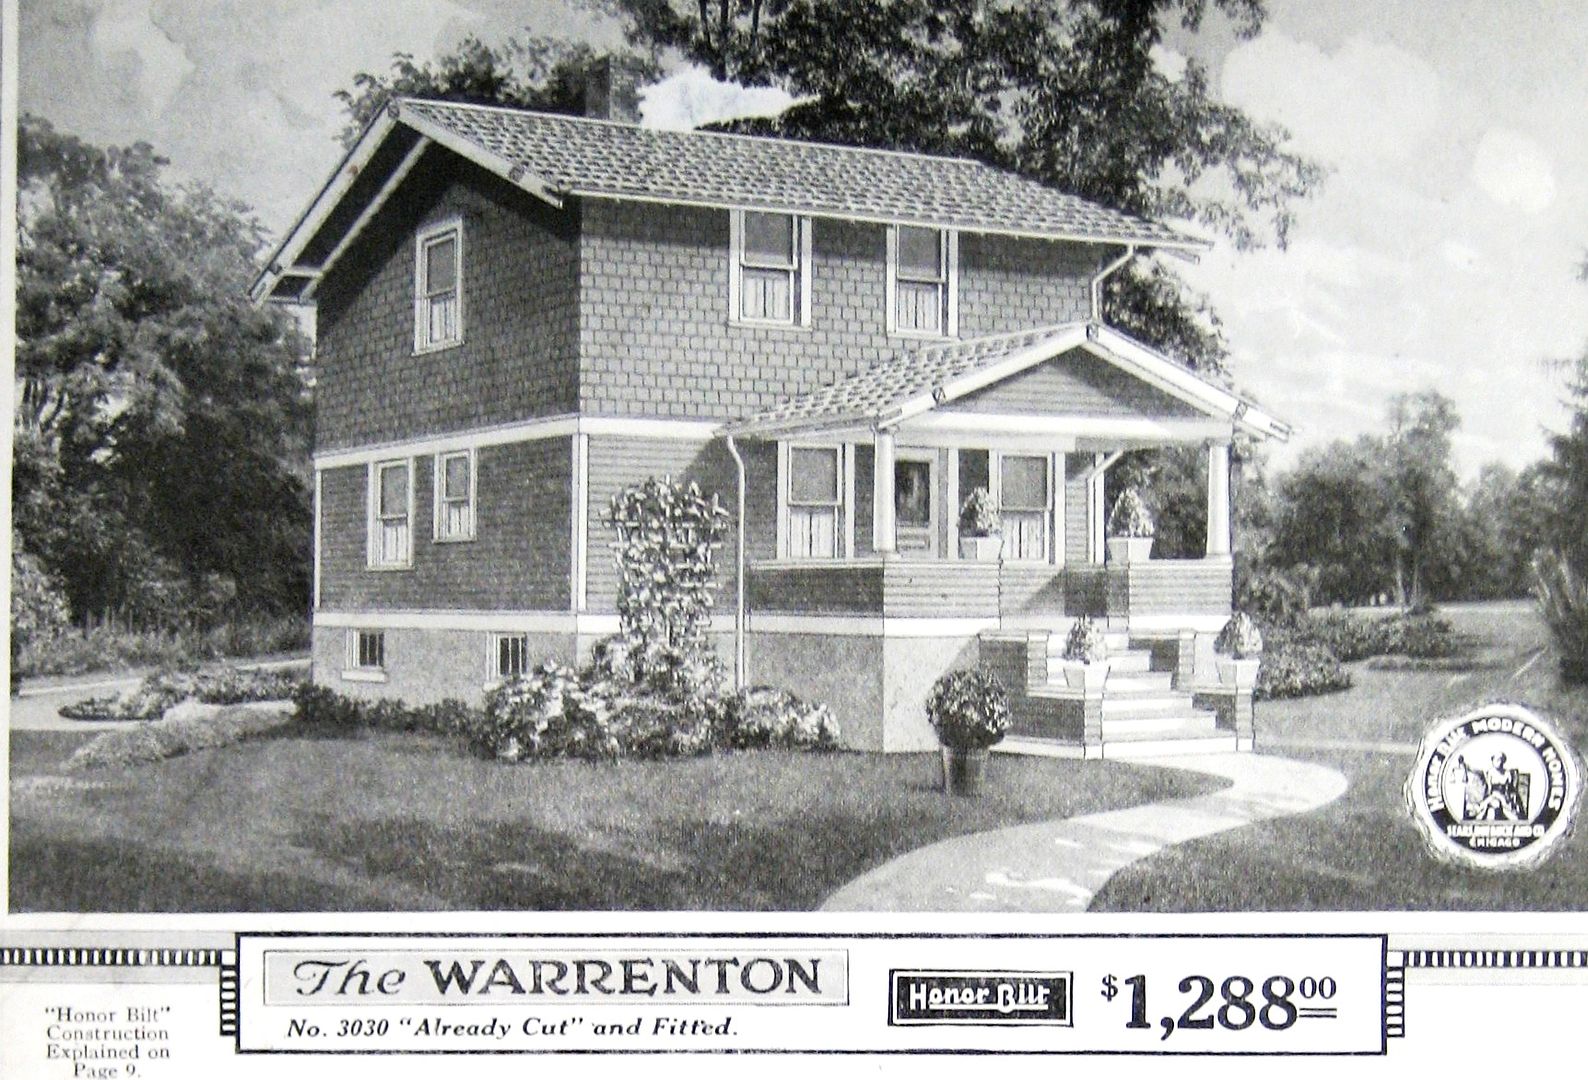 One of the eight models offered in Carlinville was The Warrenton.